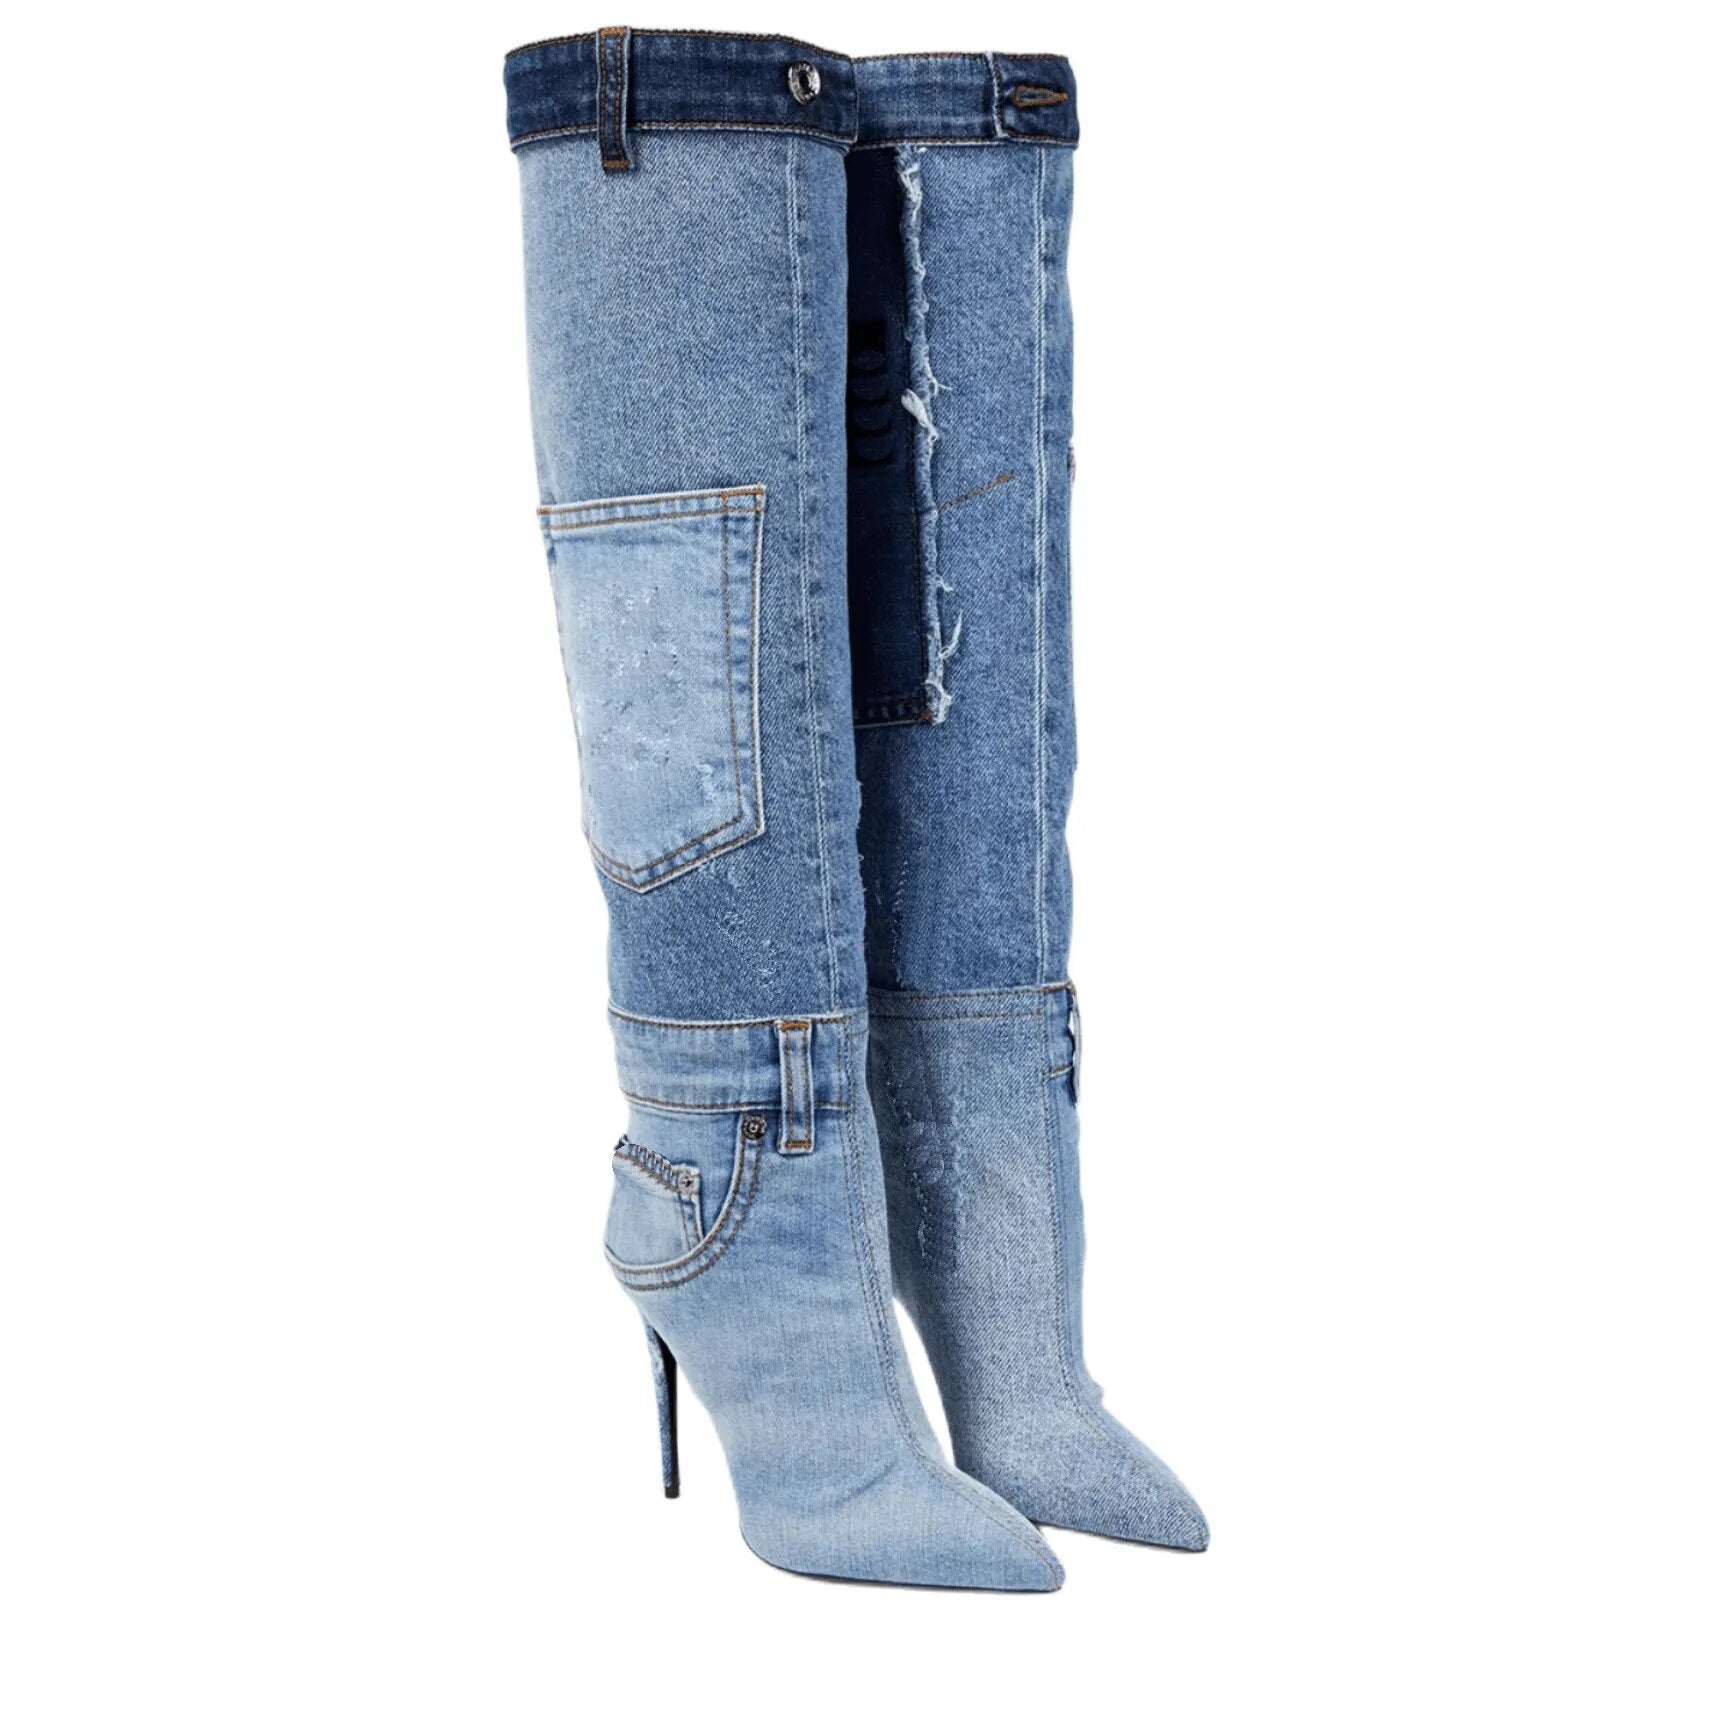 Worn Washed  Denim Cloth Over The Knee Boots  WITH Pockets